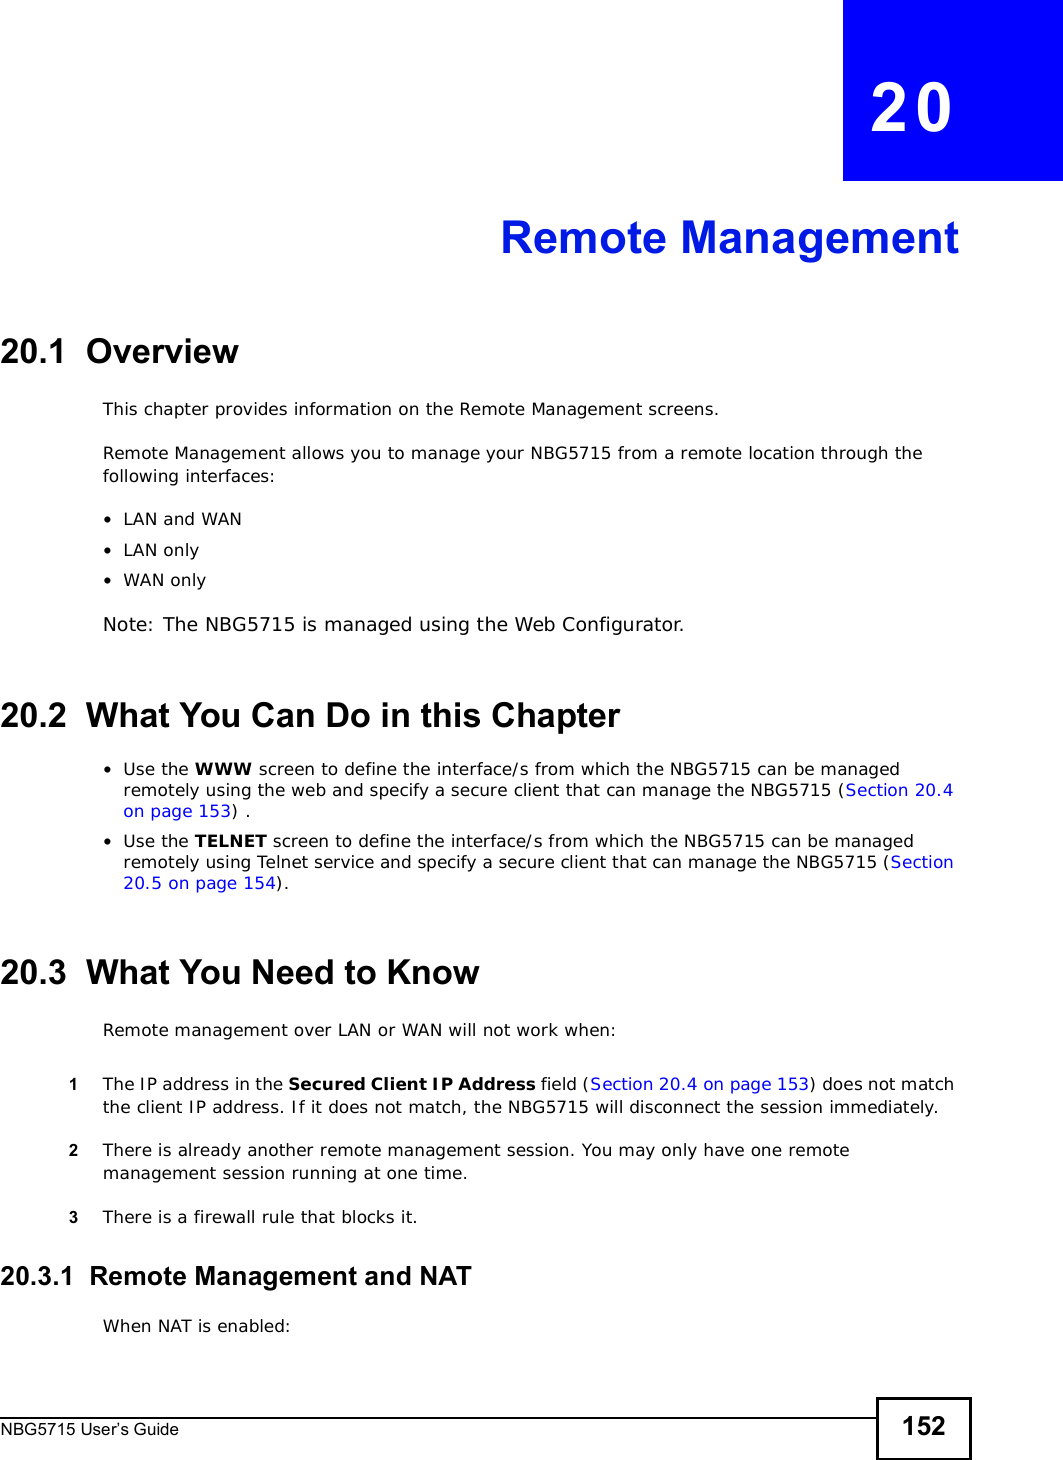 NBG5715 User’s Guide 152CHAPTER   20Remote Management20.1  OverviewThis chapter provides information on the Remote Management screens. Remote Management allows you to manage your NBG5715 from a remote location through the following interfaces:•LAN and WAN•LAN only•WAN onlyNote: The NBG5715 is managed using the Web Configurator.20.2  What You Can Do in this Chapter•Use the WWW screen to define the interface/s from which the NBG5715 can be managed remotely using the web and specify a secure client that can manage the NBG5715 (Section 20.4 on page 153) .•Use the TELNET screen to define the interface/s from which the NBG5715 can be managed remotely using Telnet service and specify a secure client that can manage the NBG5715 (Section 20.5 on page 154).20.3  What You Need to KnowRemote management over LAN or WAN will not work when:1The IP address in the Secured Client IP Address field (Section 20.4 on page 153) does not match the client IP address. If it does not match, the NBG5715 will disconnect the session immediately.2There is already another remote management session. You may only have one remote management session running at one time.3There is a firewall rule that blocks it.20.3.1  Remote Management and NATWhen NAT is enabled: